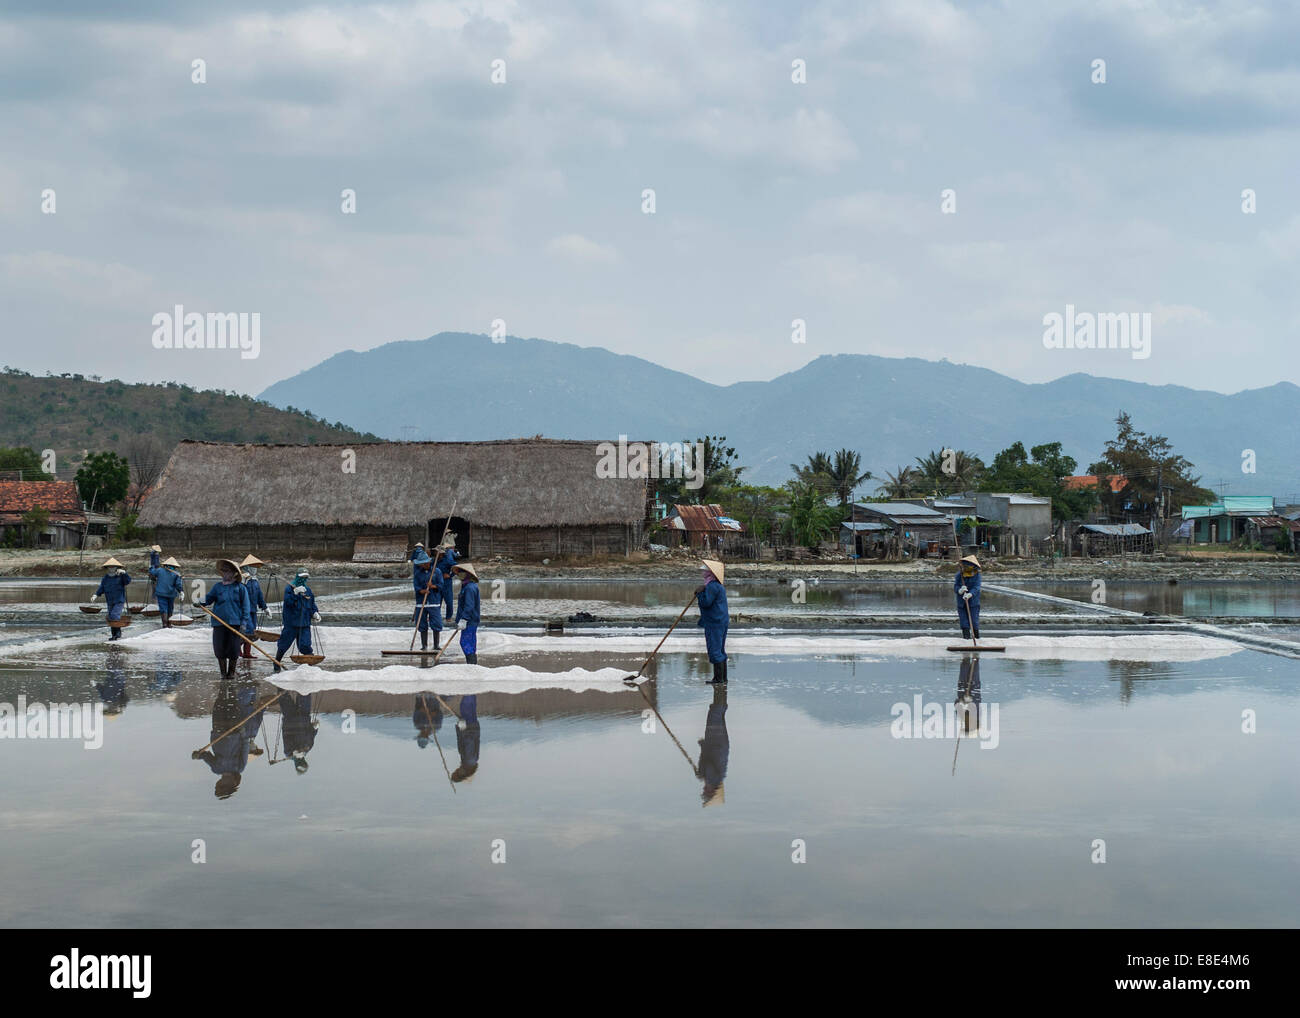 South Vietnam - March 2012: Crew of blue-clad people rake, scoop and carry baskets of freshly harvested salt. Stock Photo